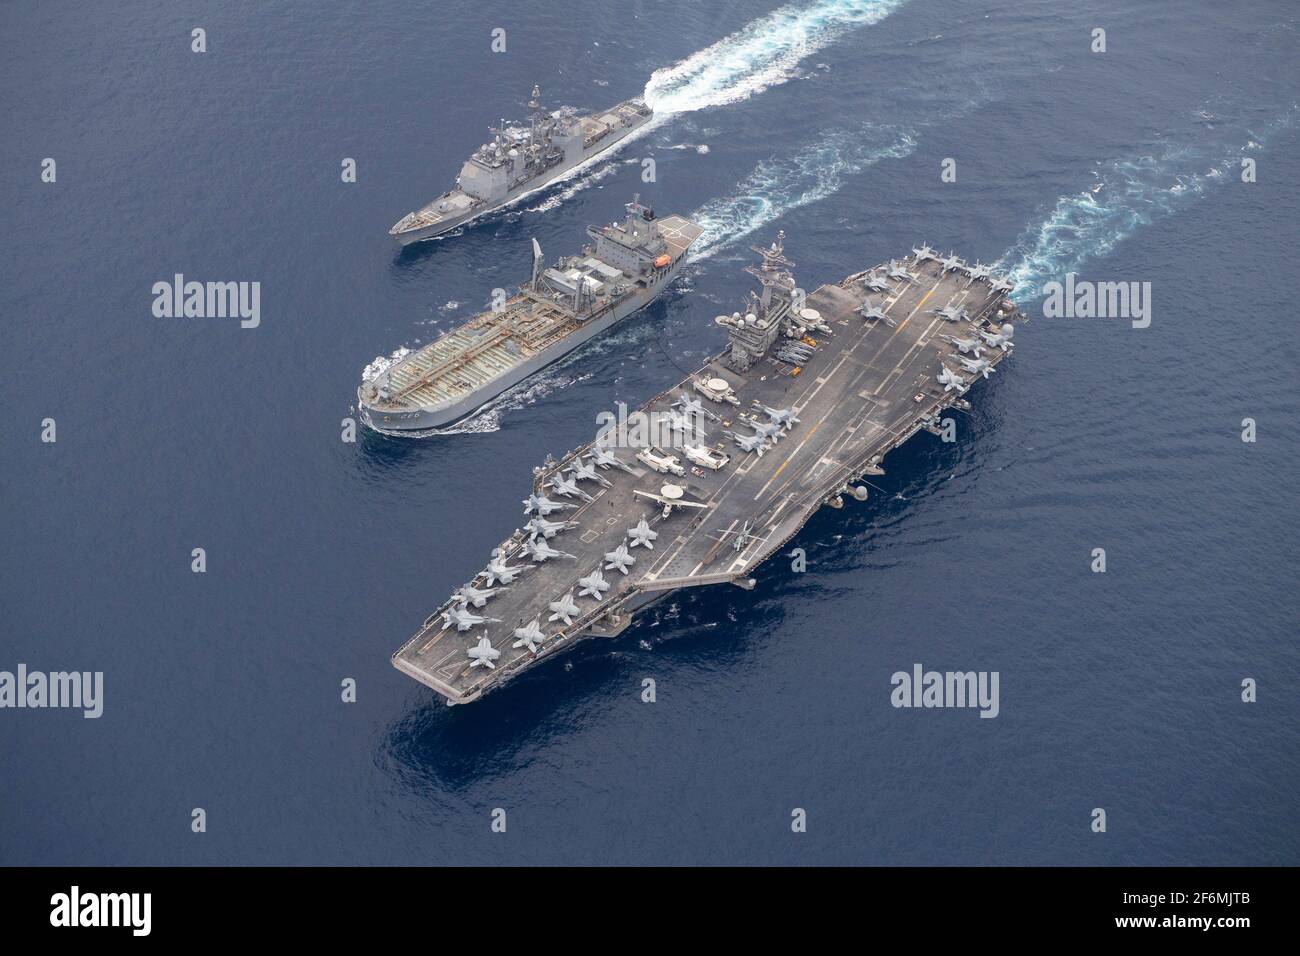 Uss Theodore Roosevelt, United States. 31st Mar, 2021. The U.S. Navy Nimitz-class, nuclear-powered, aircraft carrier USS Theodore Roosevelt, right, is refueled by the Royal Australian Navy ship HMAS Sirius, center, while the Ticonderoga-class guided-missile cruiser USS Bunker Hill transits alongside during a replenishment-at-sea March 31, 2021 on the Indian Ocean. Credit: Planetpix/Alamy Live News Stock Photo